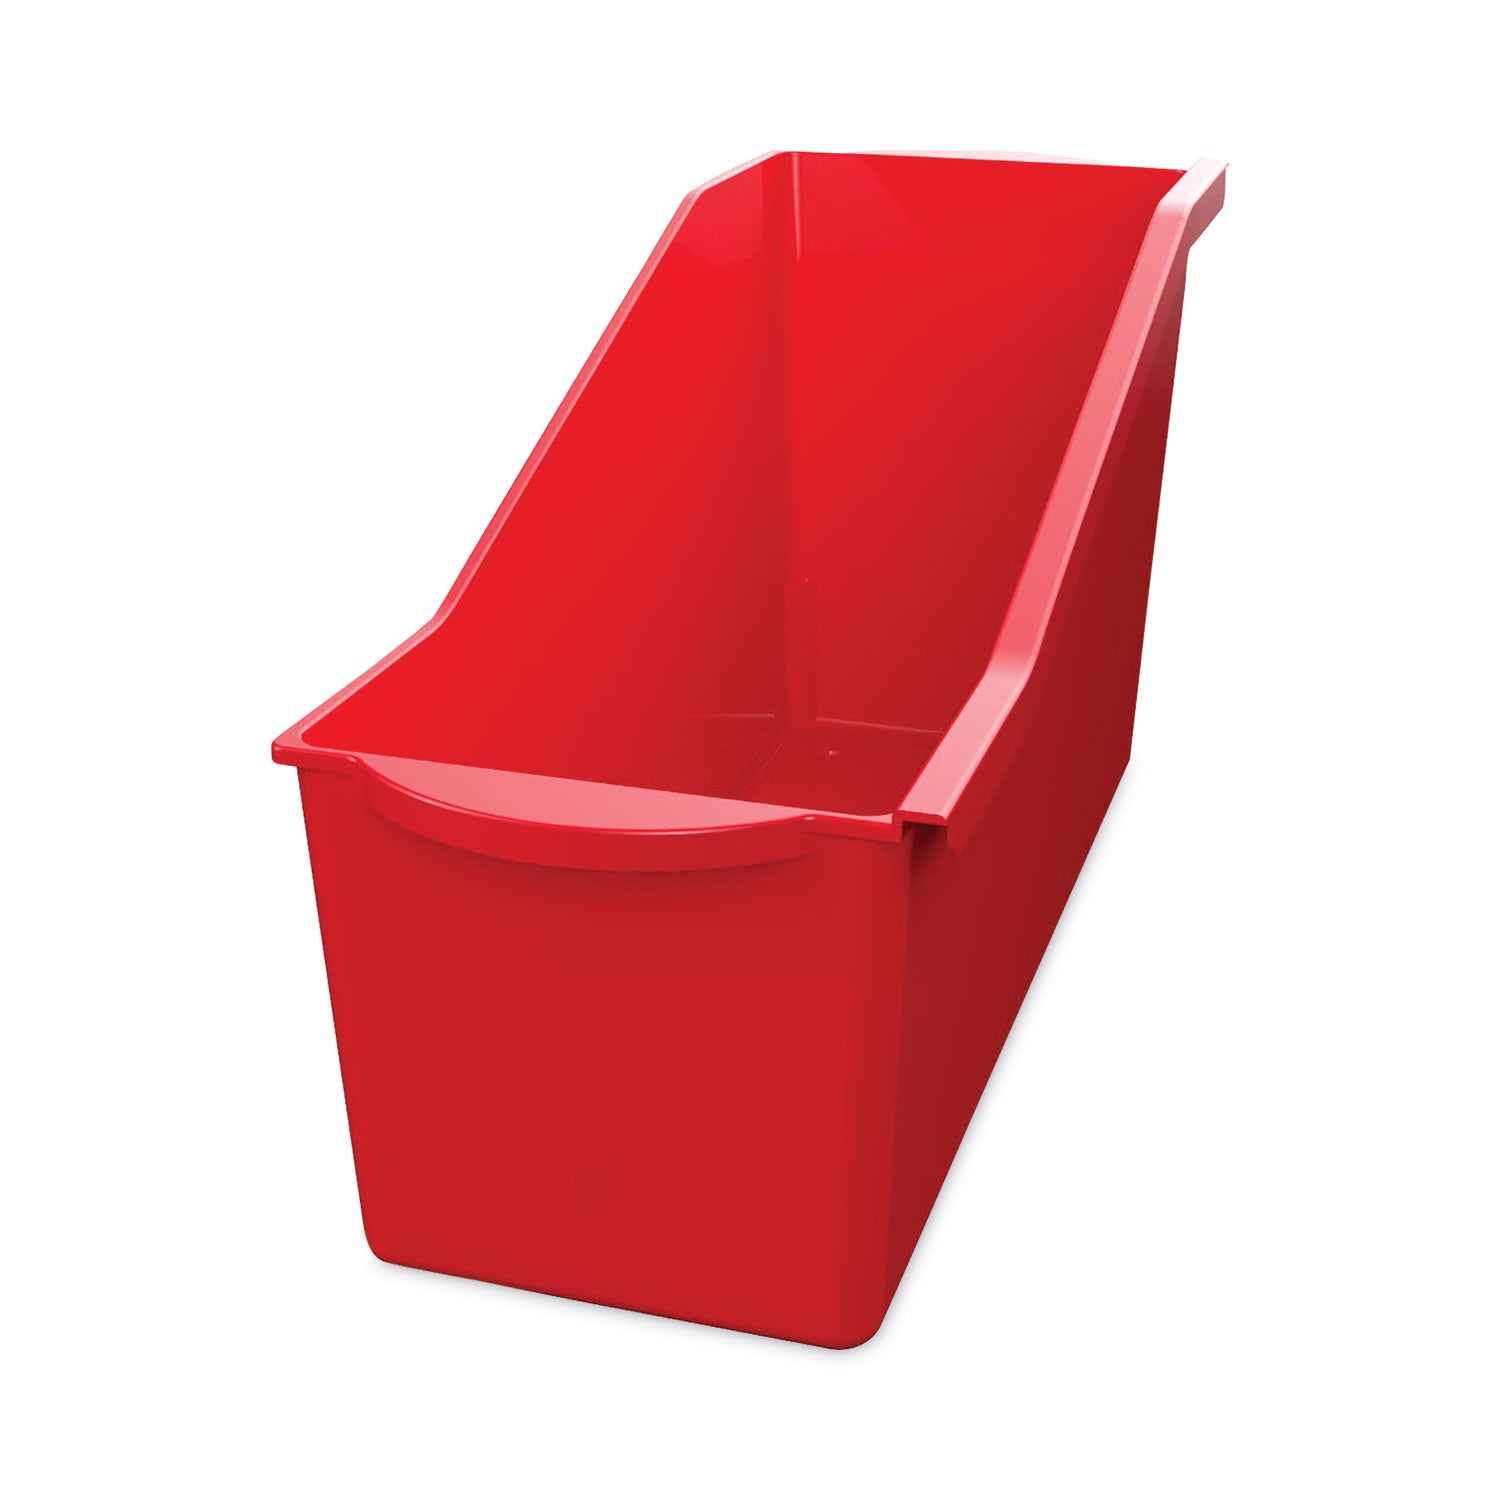 antimicrobial-book-bin-142-x-534-x-735-red_def39508red - 2